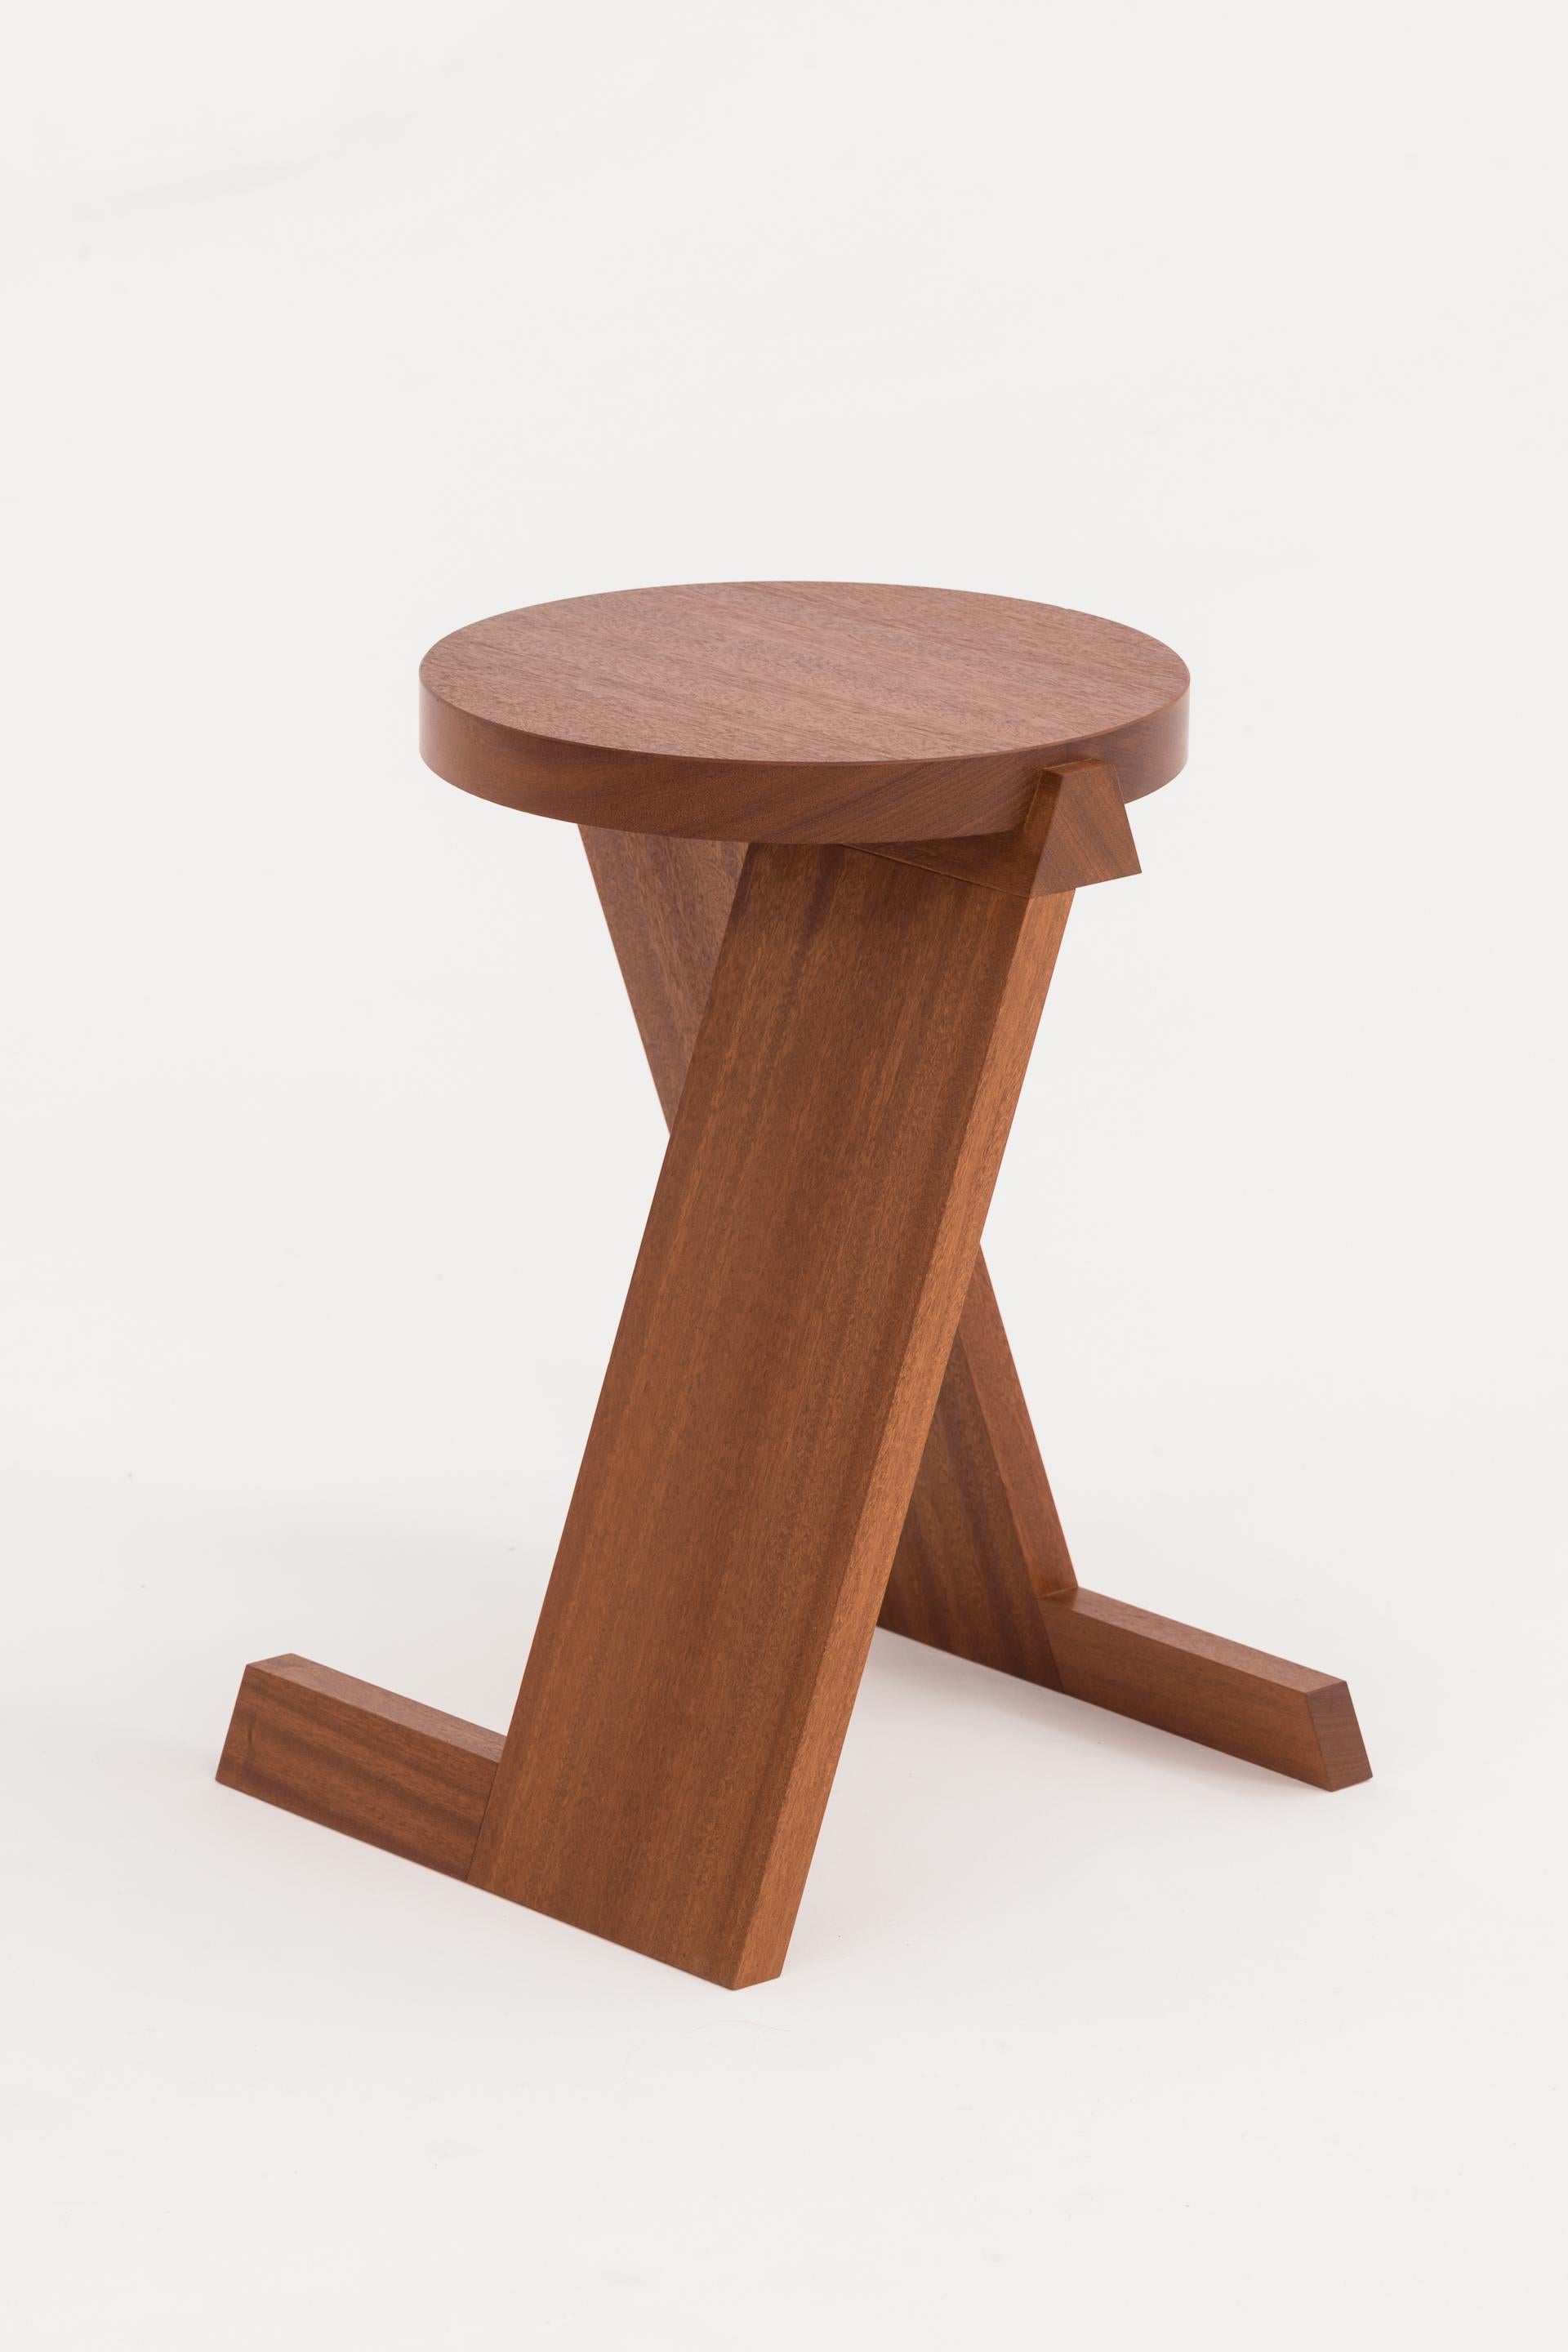 Aleksander Oniszh Pawn stool by Nów
Designed by Aleksander Oniszh
Dimensions: D 35 x W 31 x H 46 cm
Materials: american cherry, american walnut, sapelli, canadian maple.

Aleksander Oniszh:
Furniture designer and maker. He was trained in